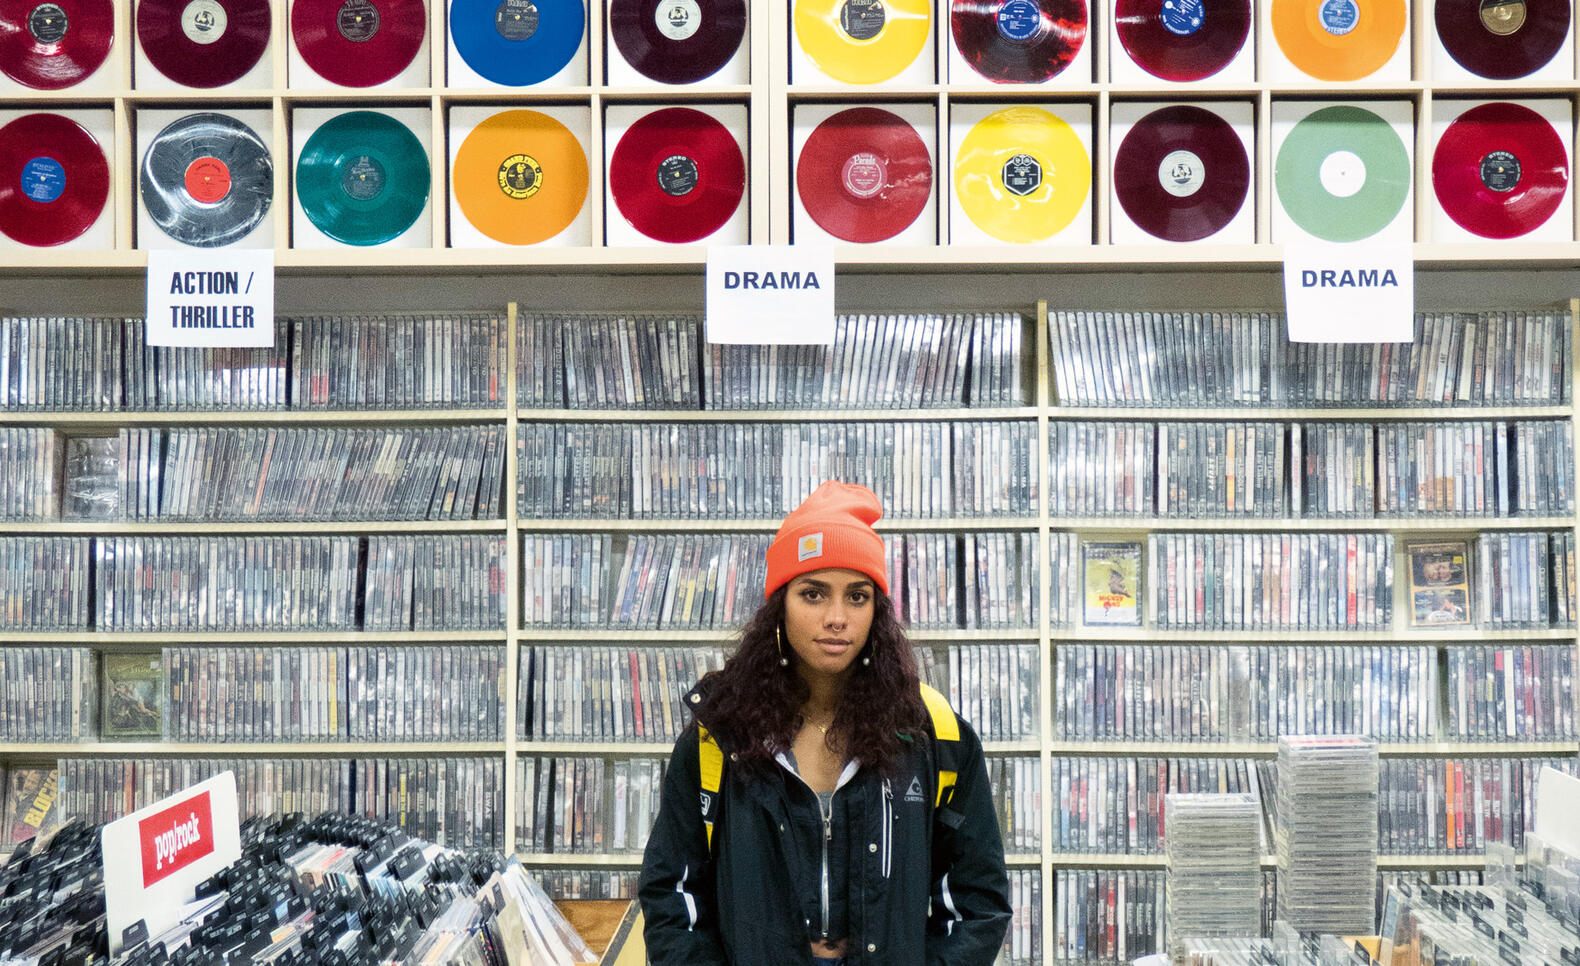 Person standing in a Whittier record store